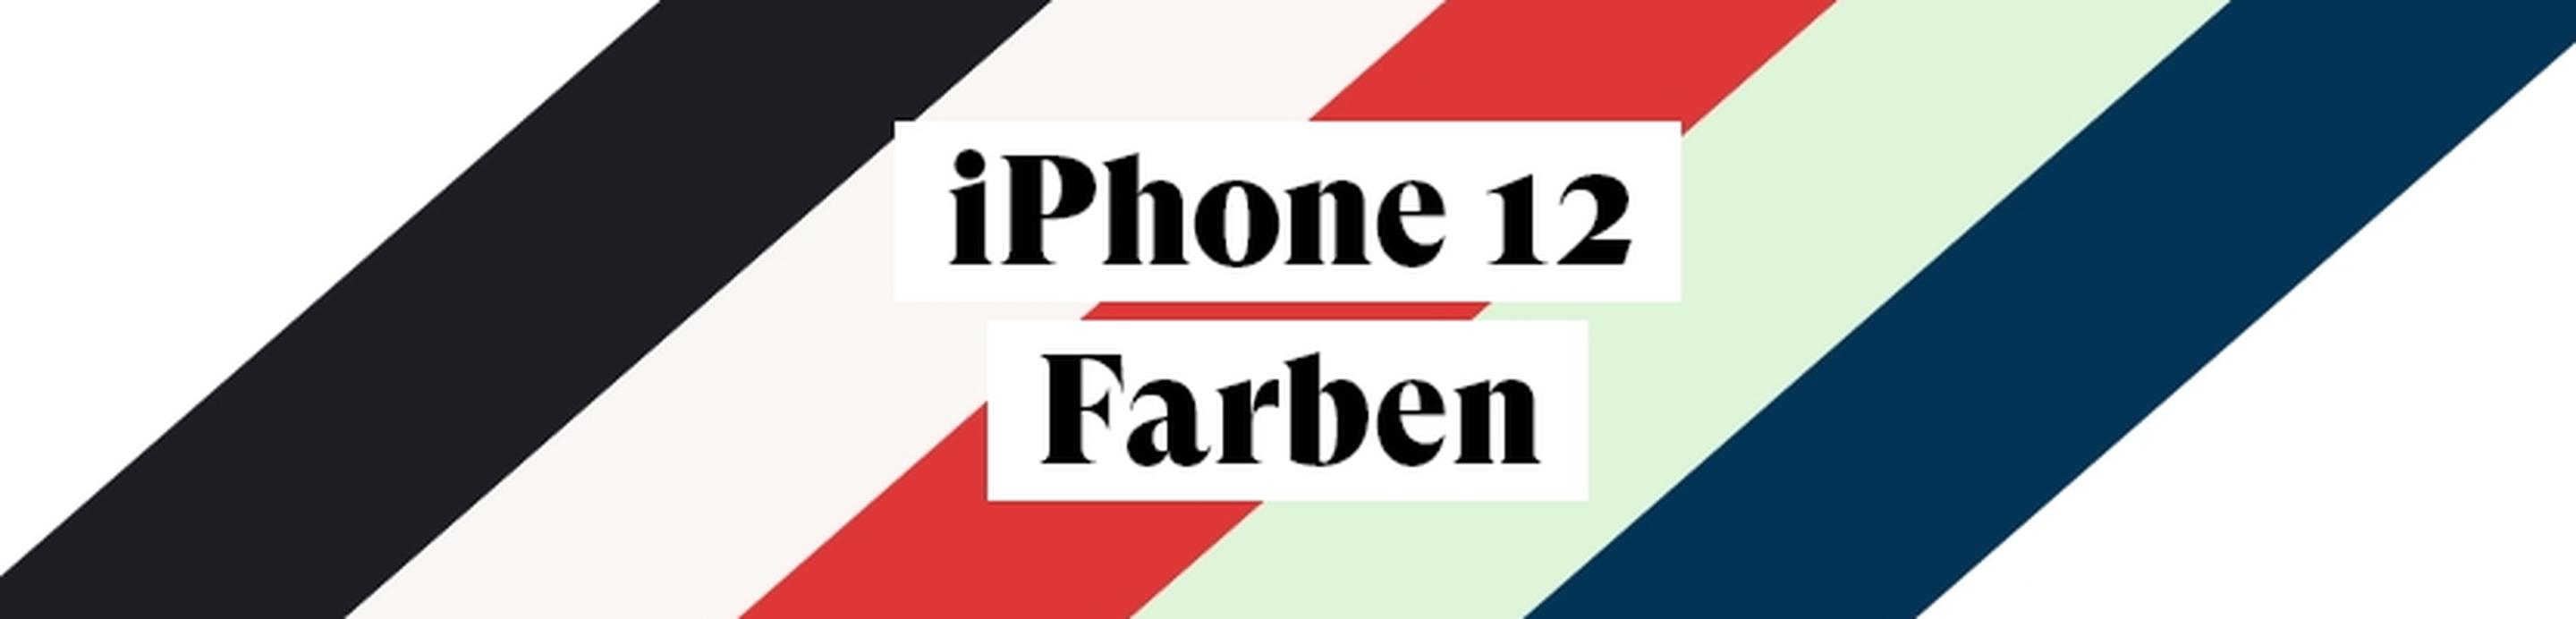 iPhone 12 alle Farben